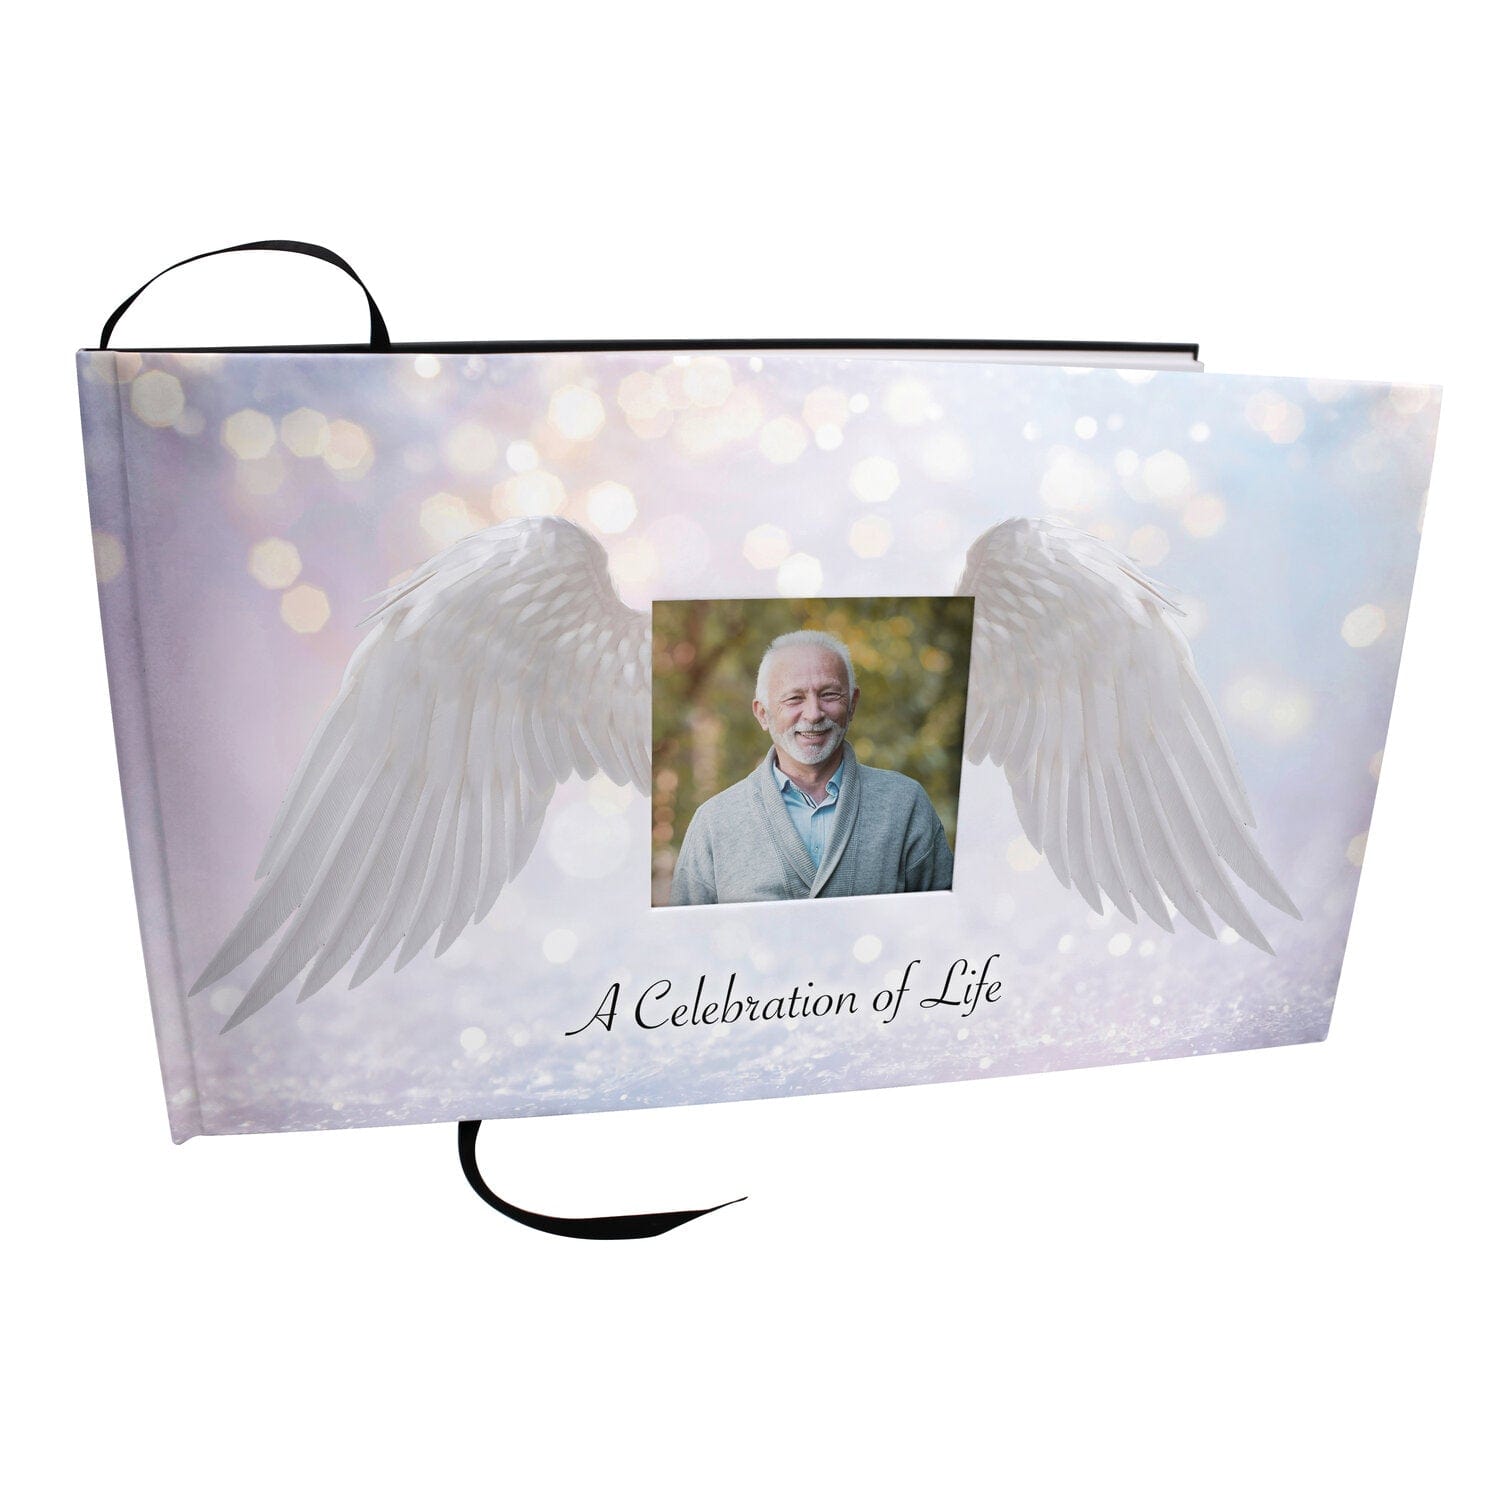 Commemorative Cremation Urns Loving Angel Wings Matching Themed 'Celebration of Life' Guest Book for Funeral or Memorial Service